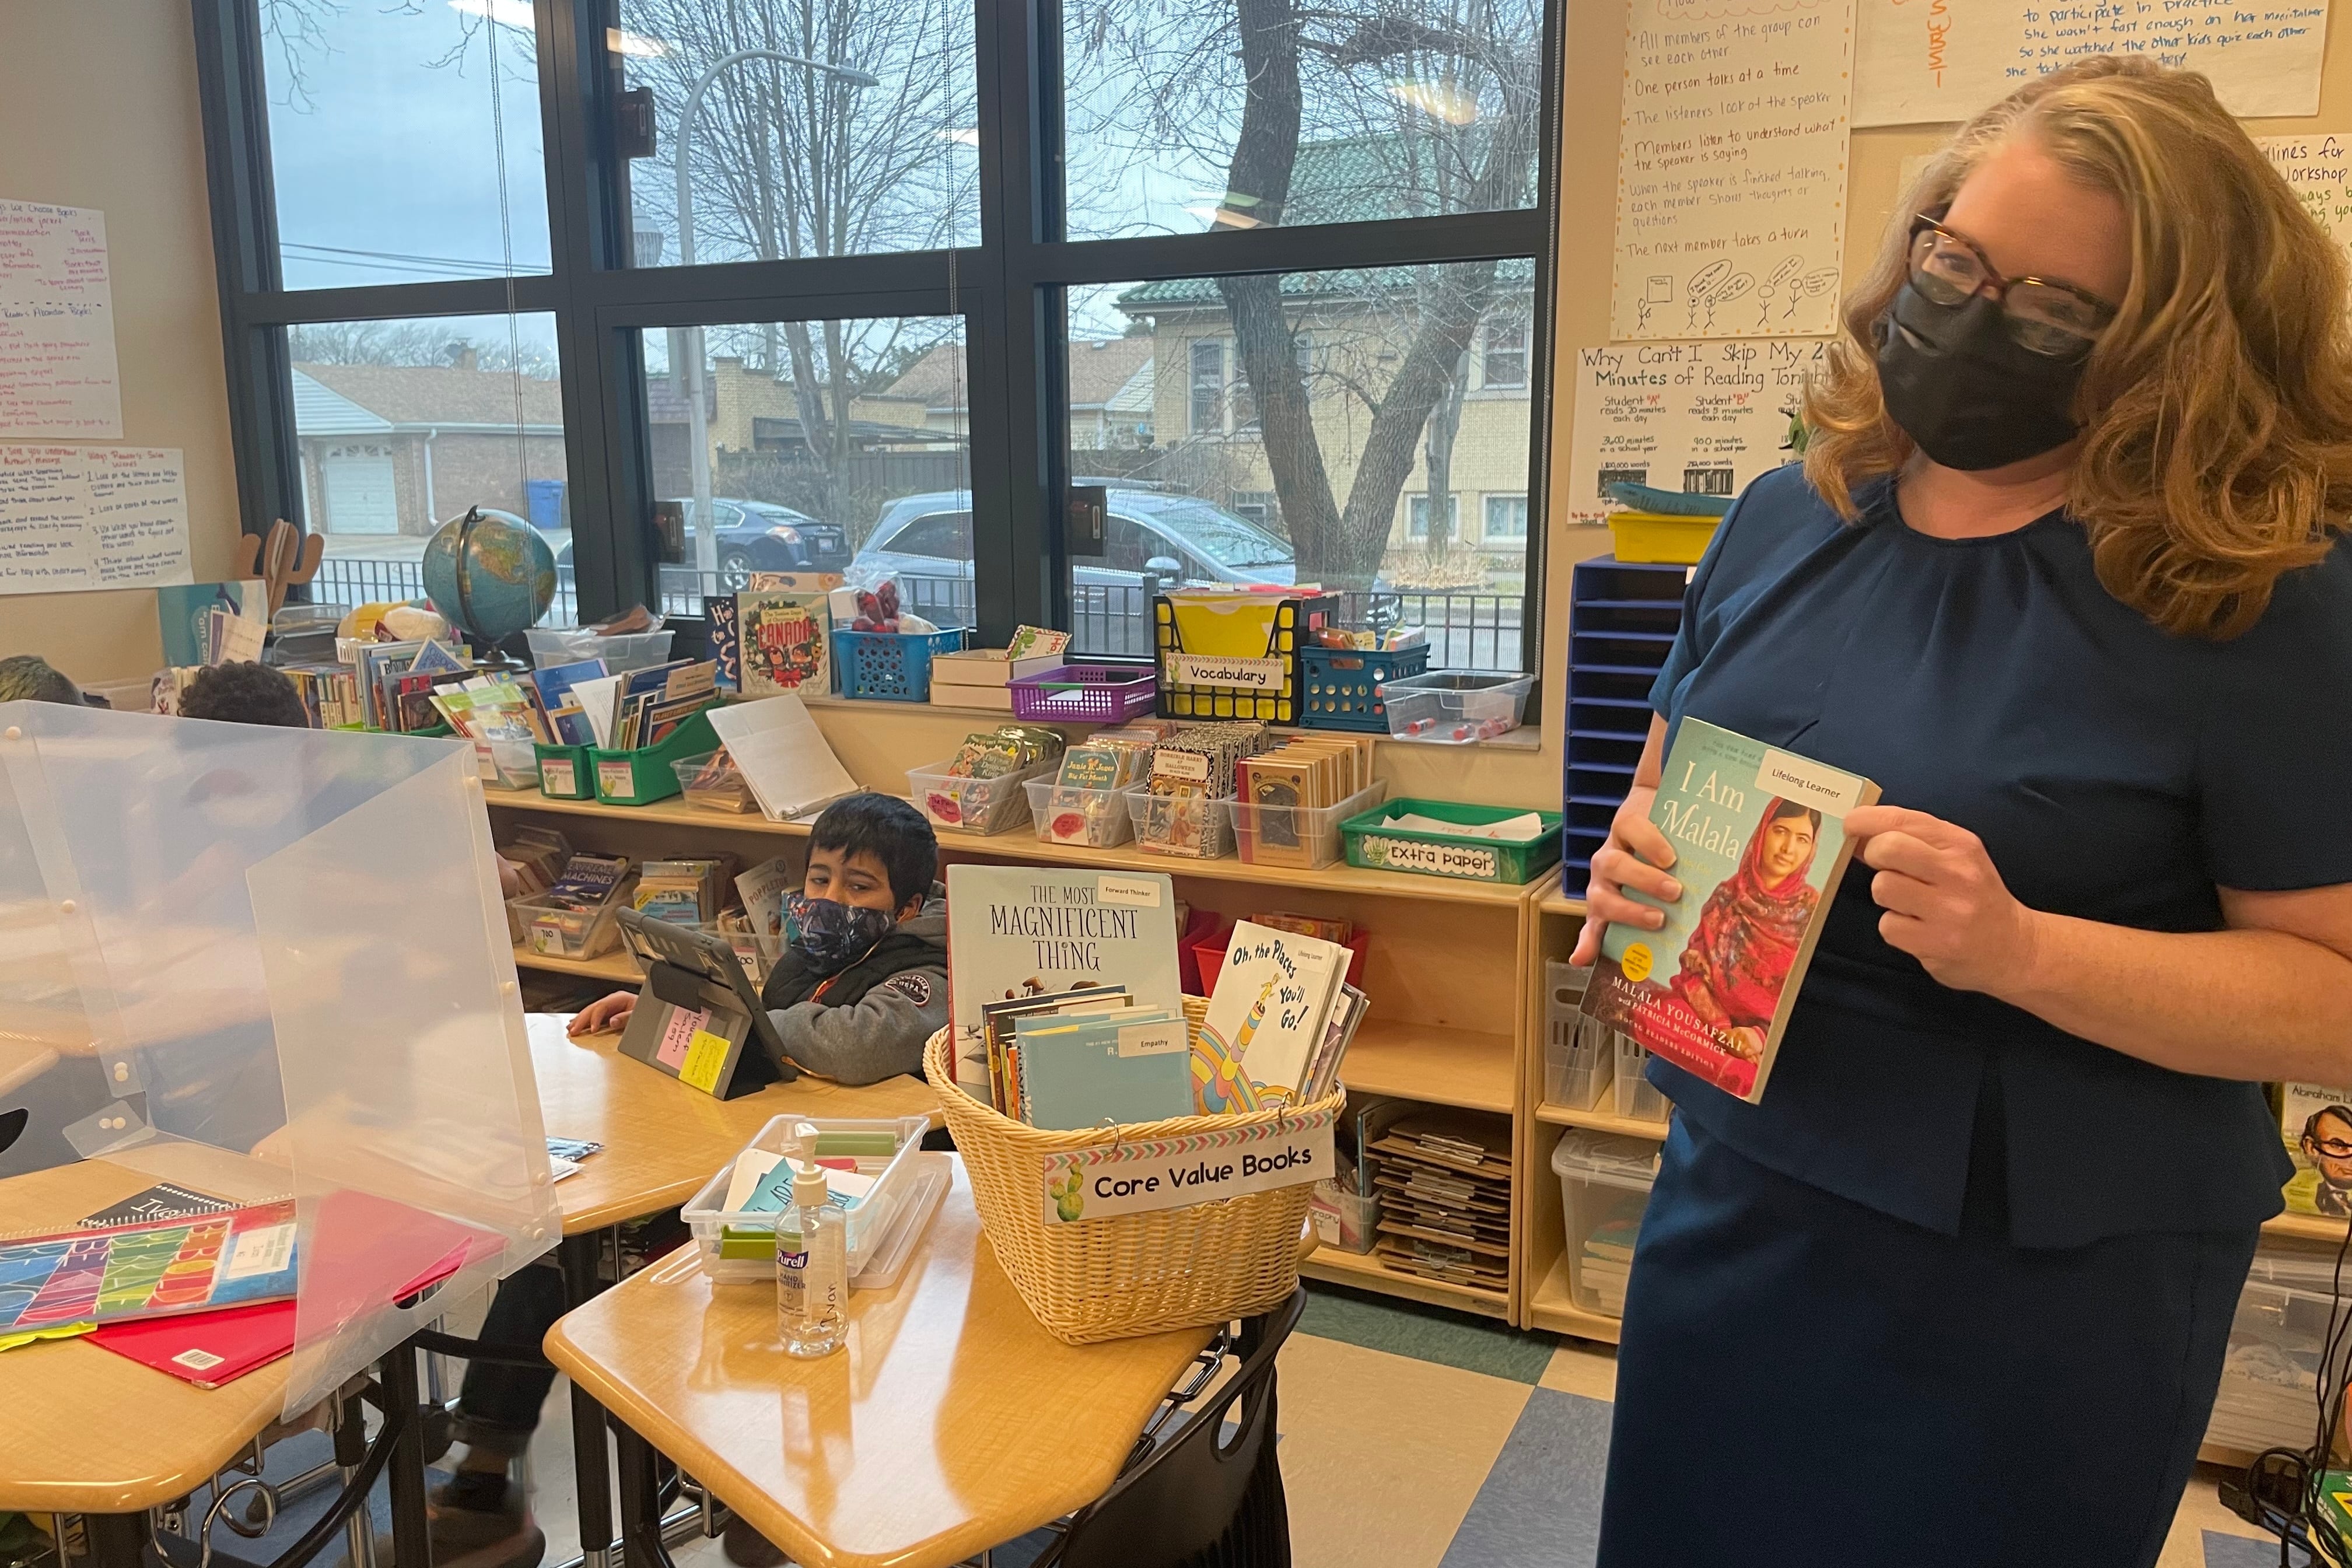 A woman, wearing a blue dress, glasses, and protective mask, hold up the book I Am Malala in an elementary school classroom as students sit at their desks in the background.